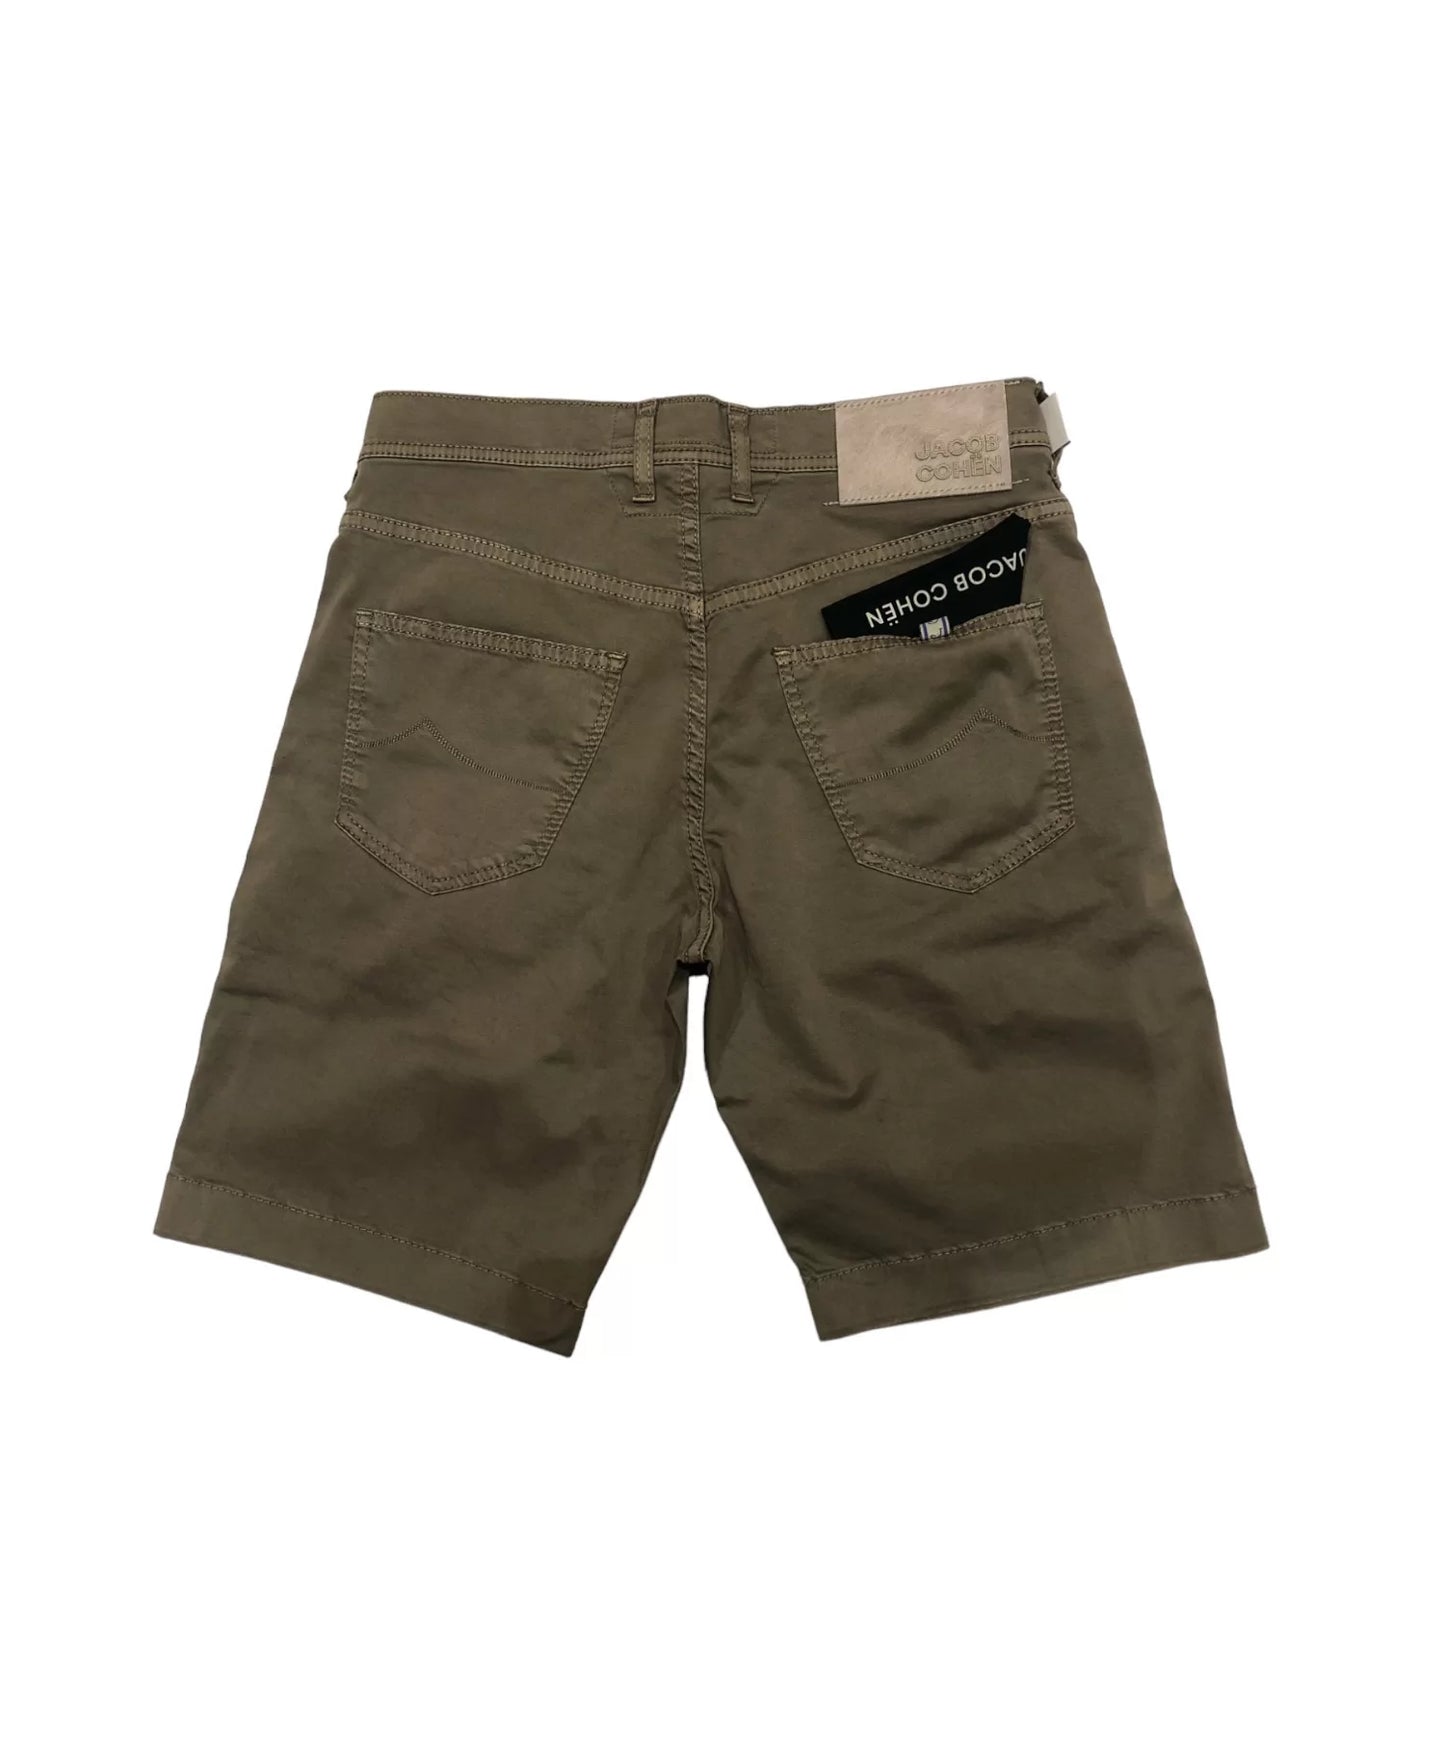 Jacob Cohën Men's Nicolas Shorts in Taupe - Back View